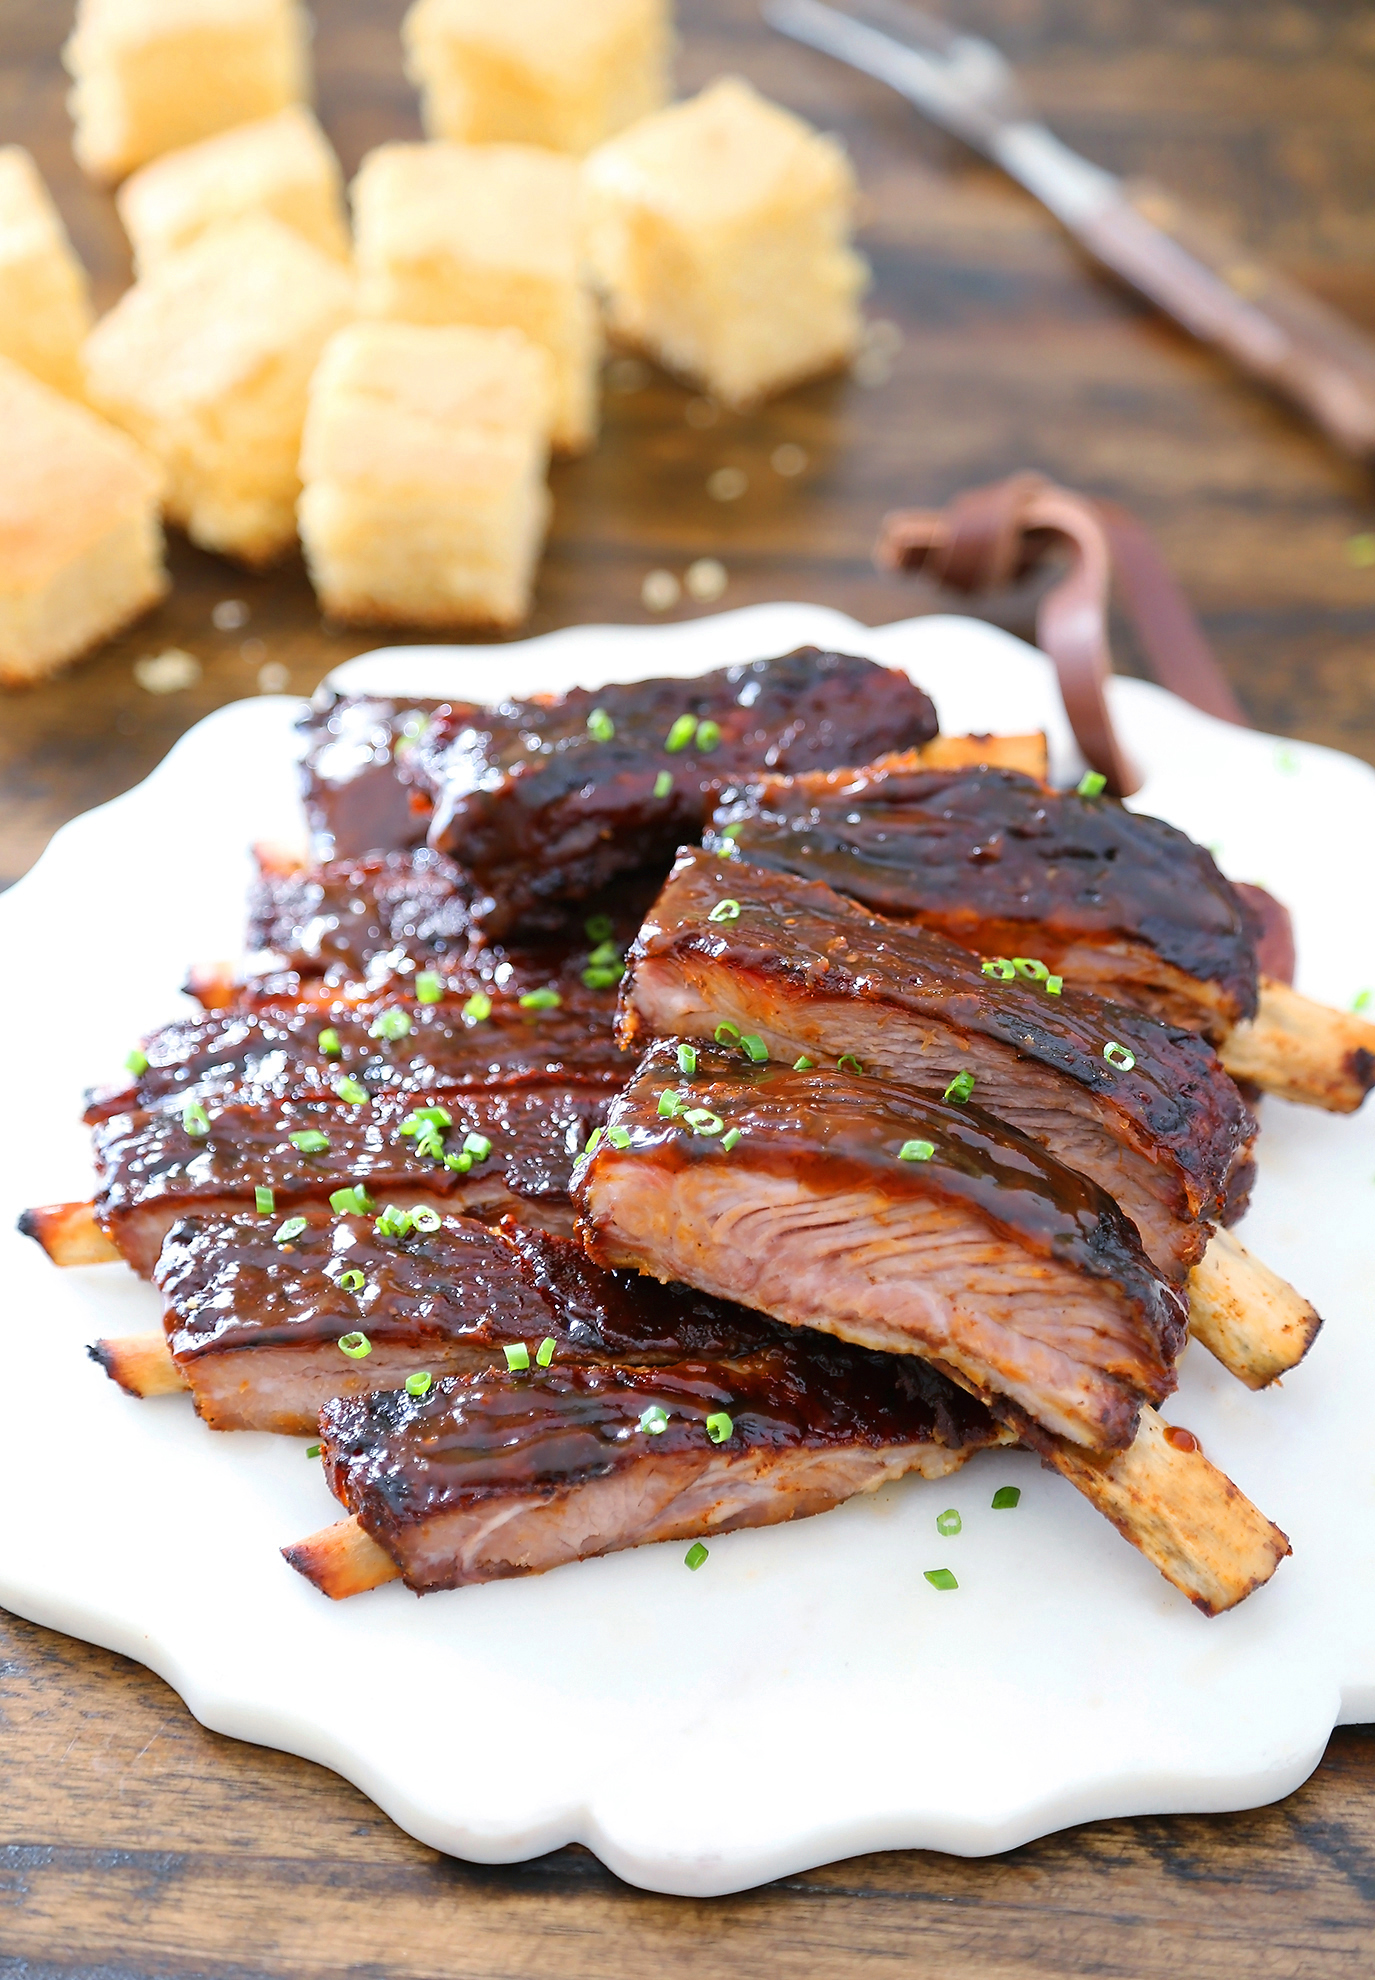 Sticky BBQ Spareribs - Melt-in-your-mouth, saucy BBQ spare ribs made in under 30 minutes! thecomfortofcooking.com